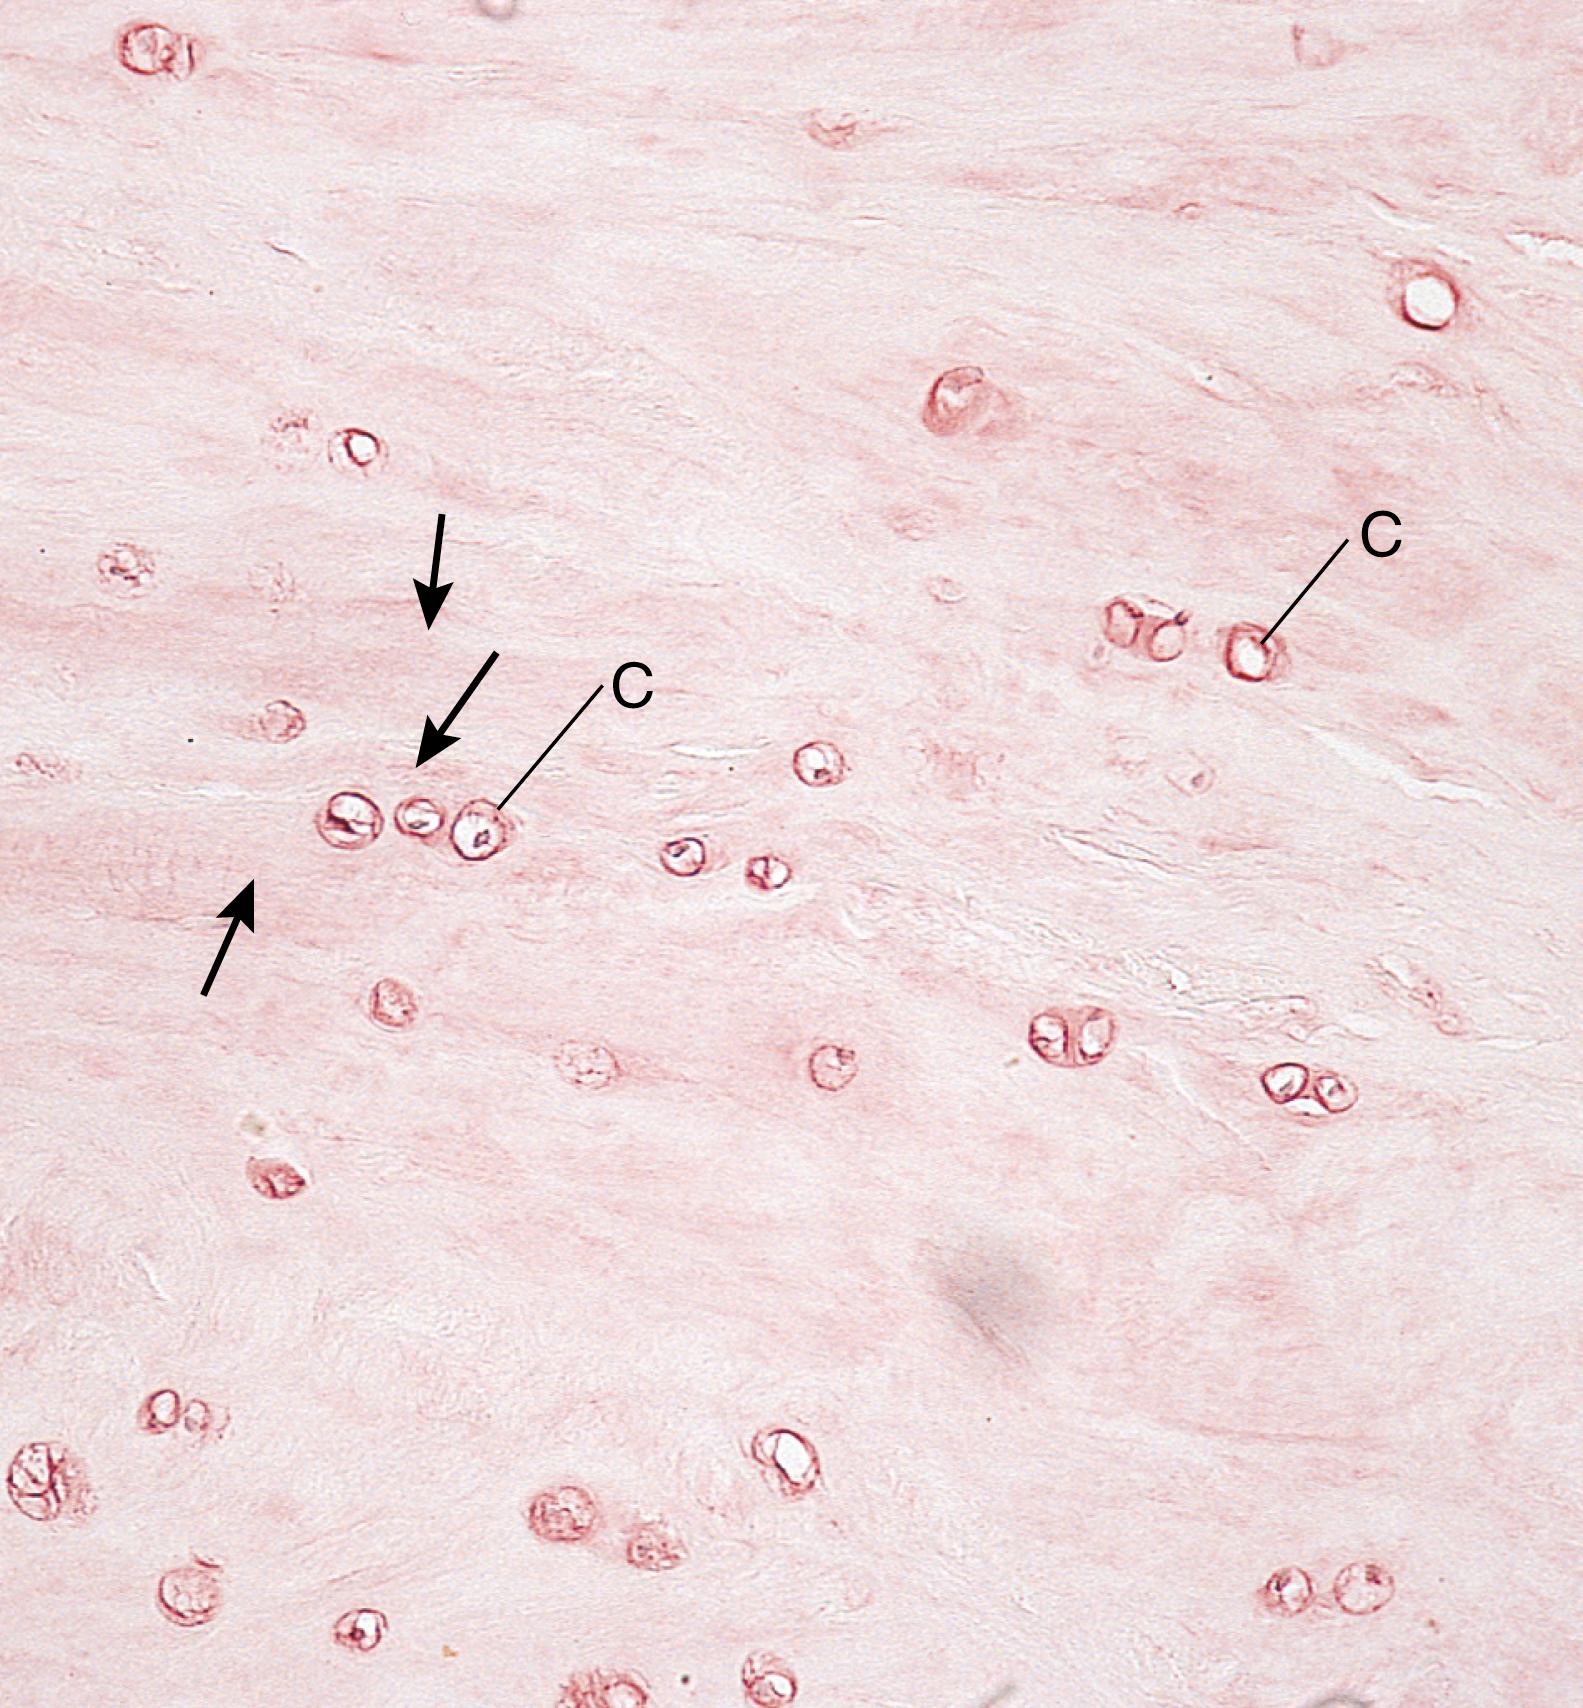 Fig. 7.7, Light micrograph of fibrocartilage (×132). Note alignment of the chondrocytes (C) in rows interspersed with thick bundles of collagen fibers (arrows) .